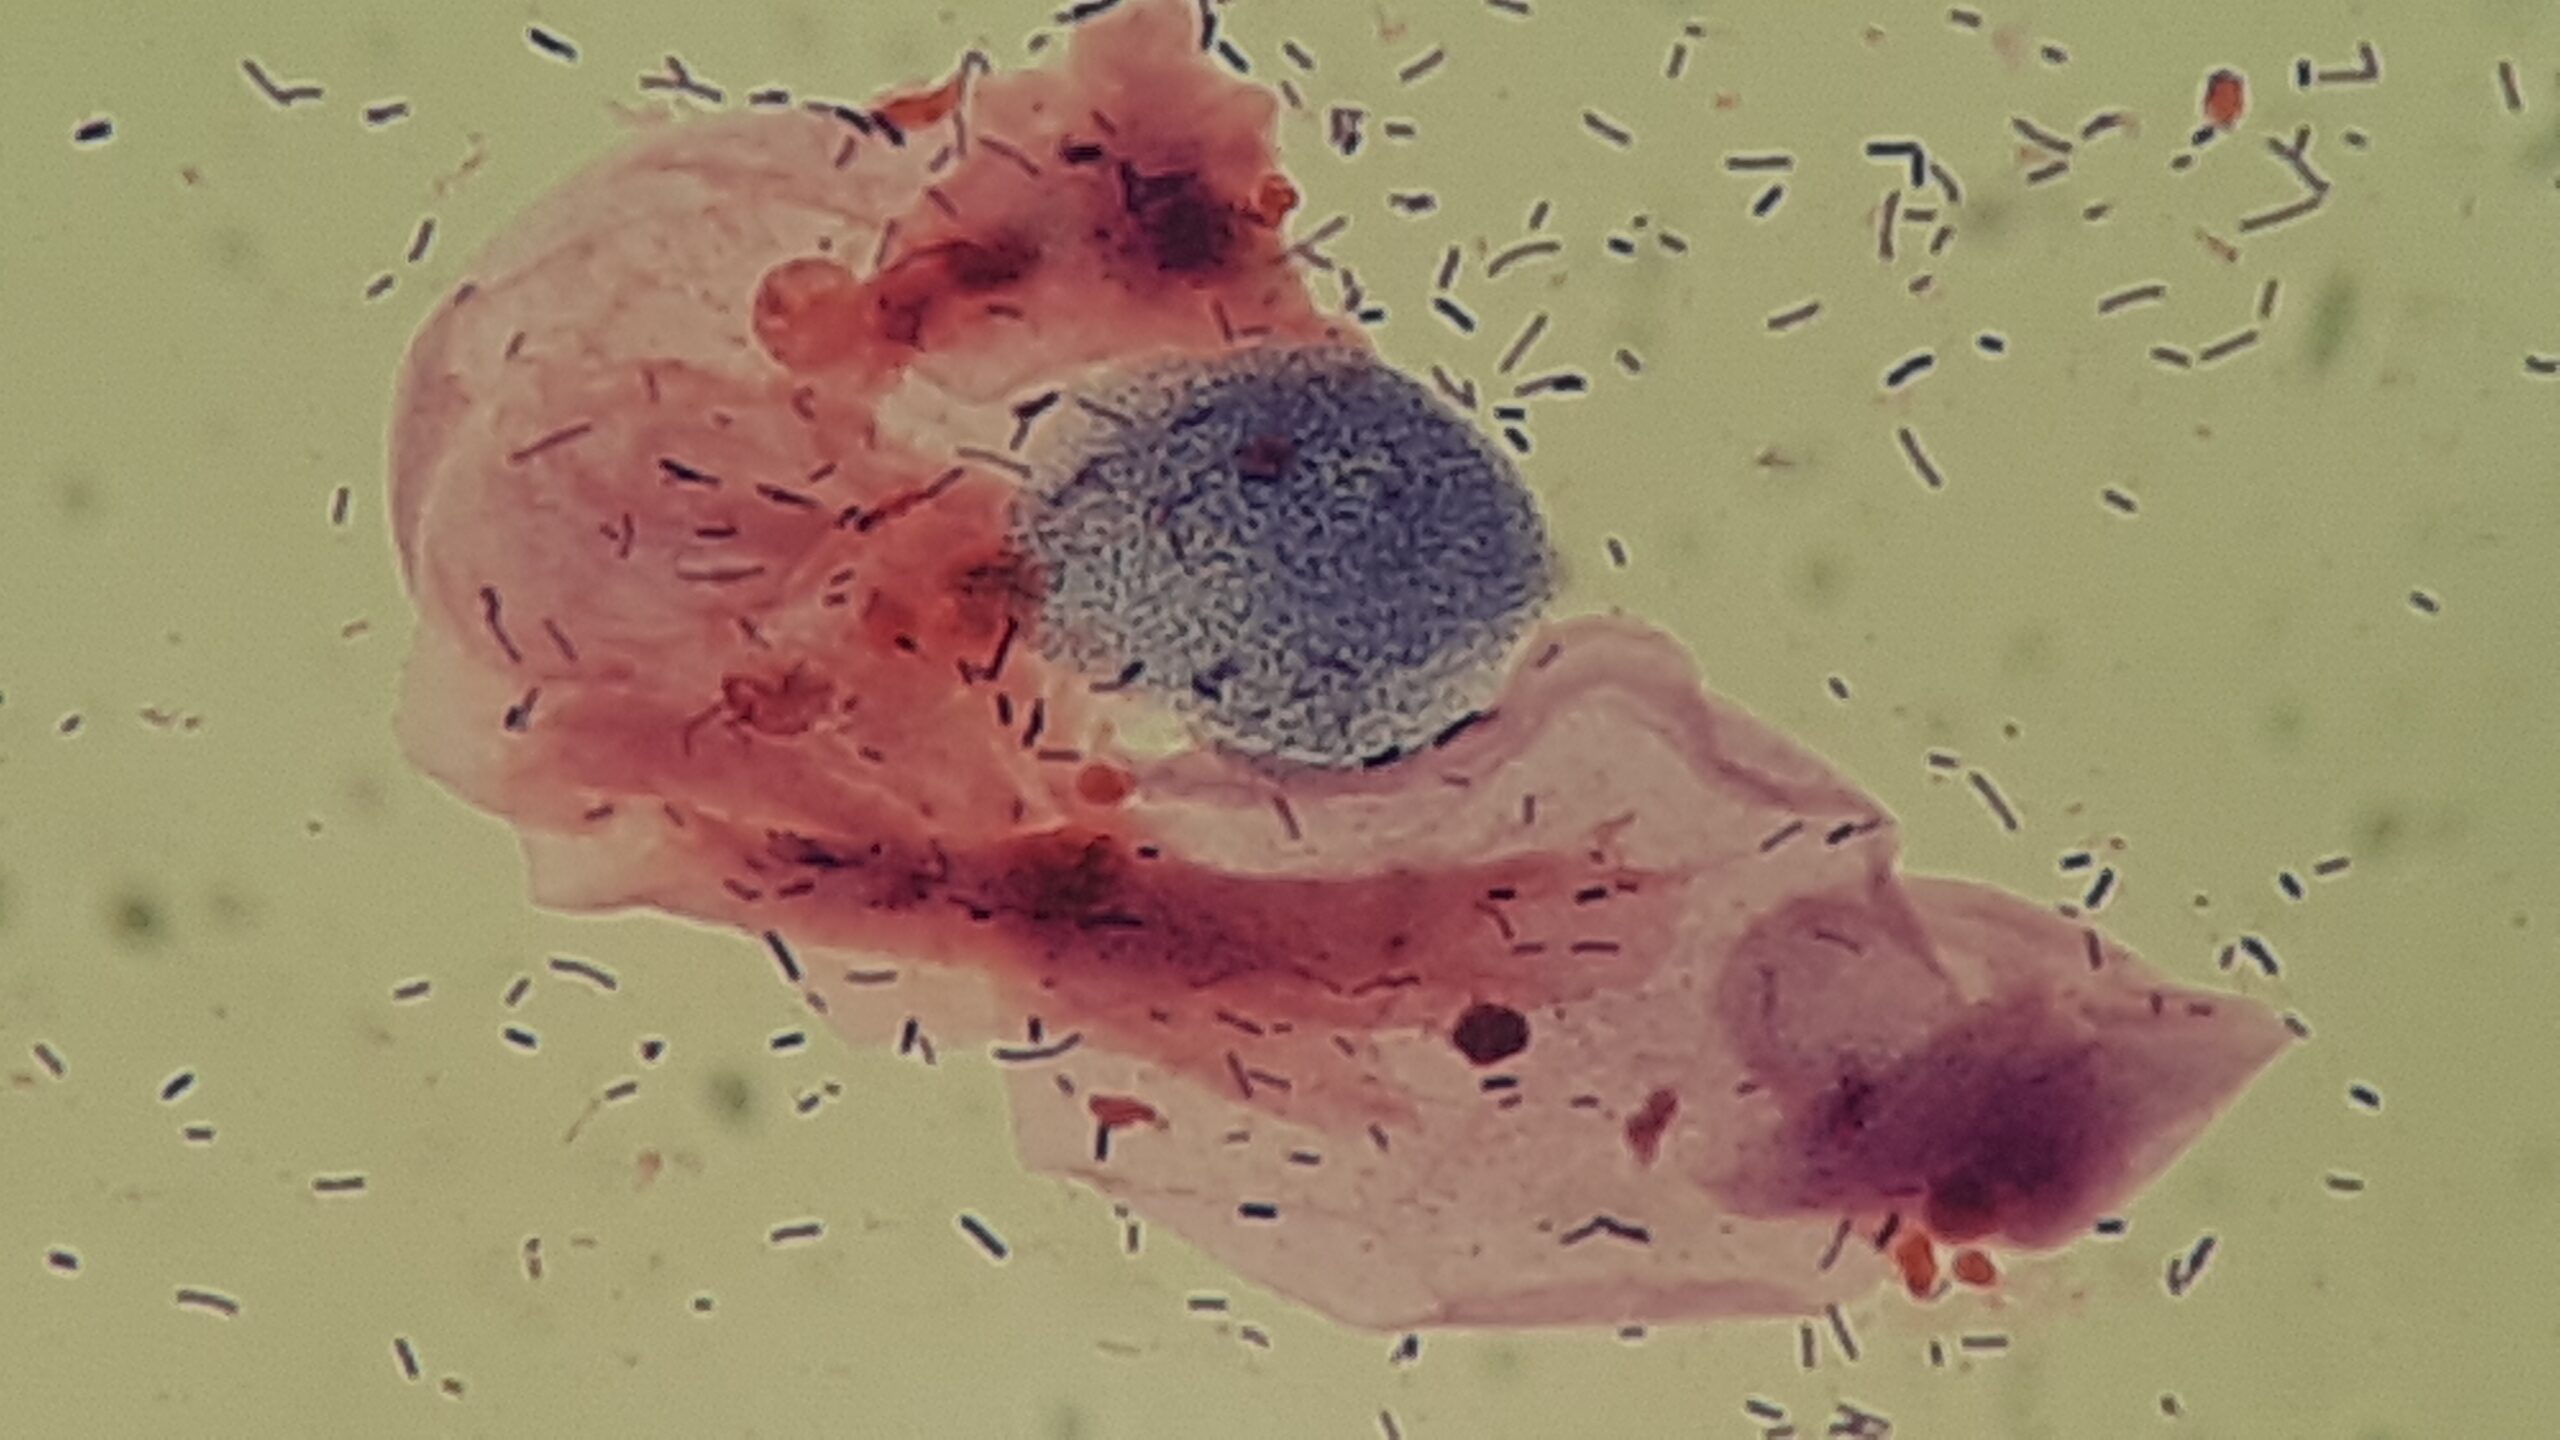 Vaginal Cell and Bacterial Interaction in Gram staining of HVS